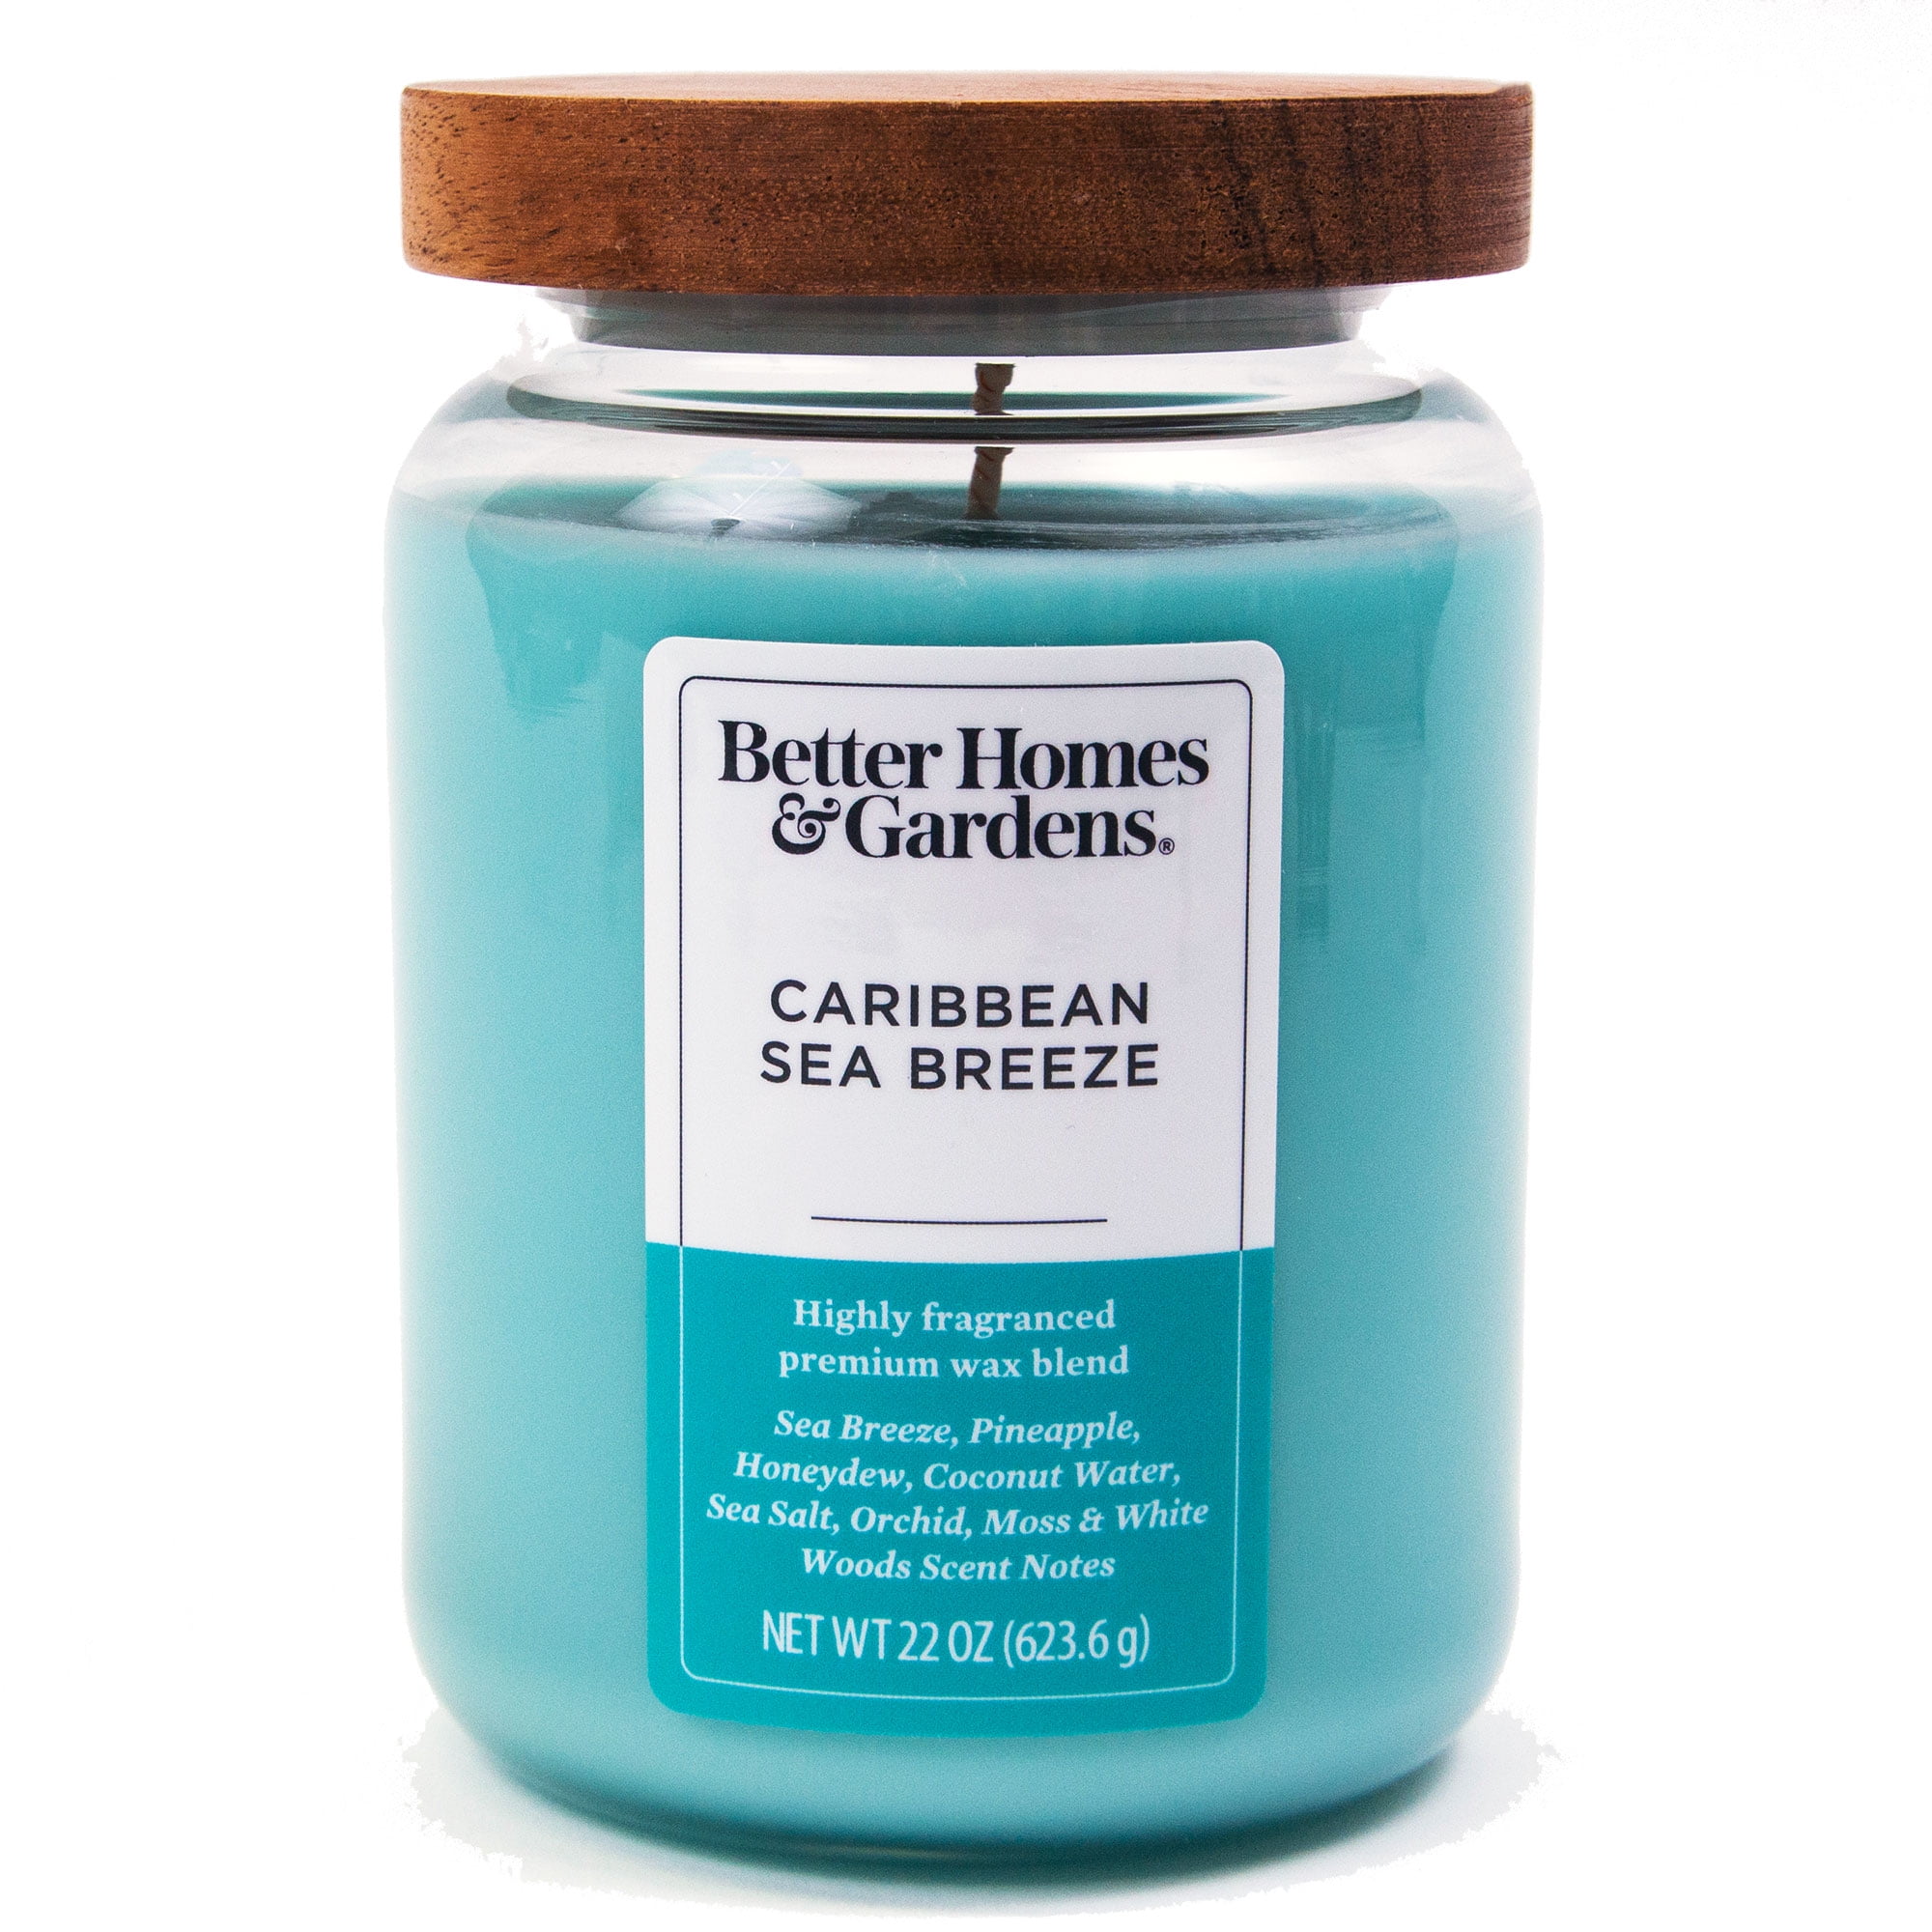 Better Homes & Gardens 12oz Caribbean Sea Breeze Scented 2-Wick Ombre Jar Candle